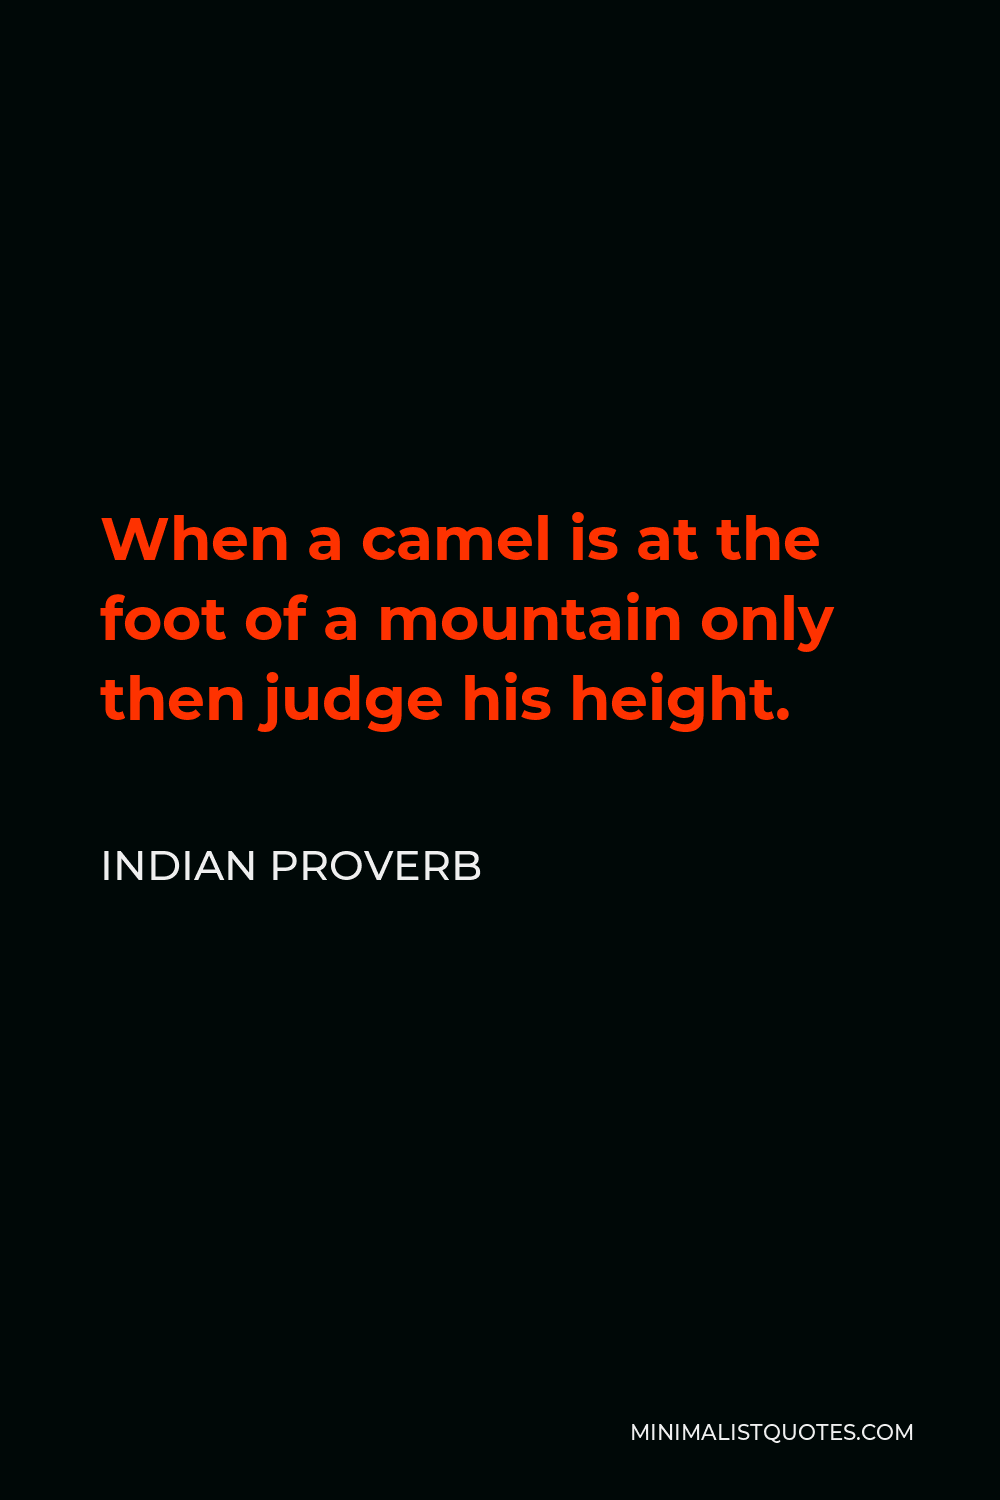 Indian Proverb Quote - When a camel is at the foot of a mountain only then judge his height.